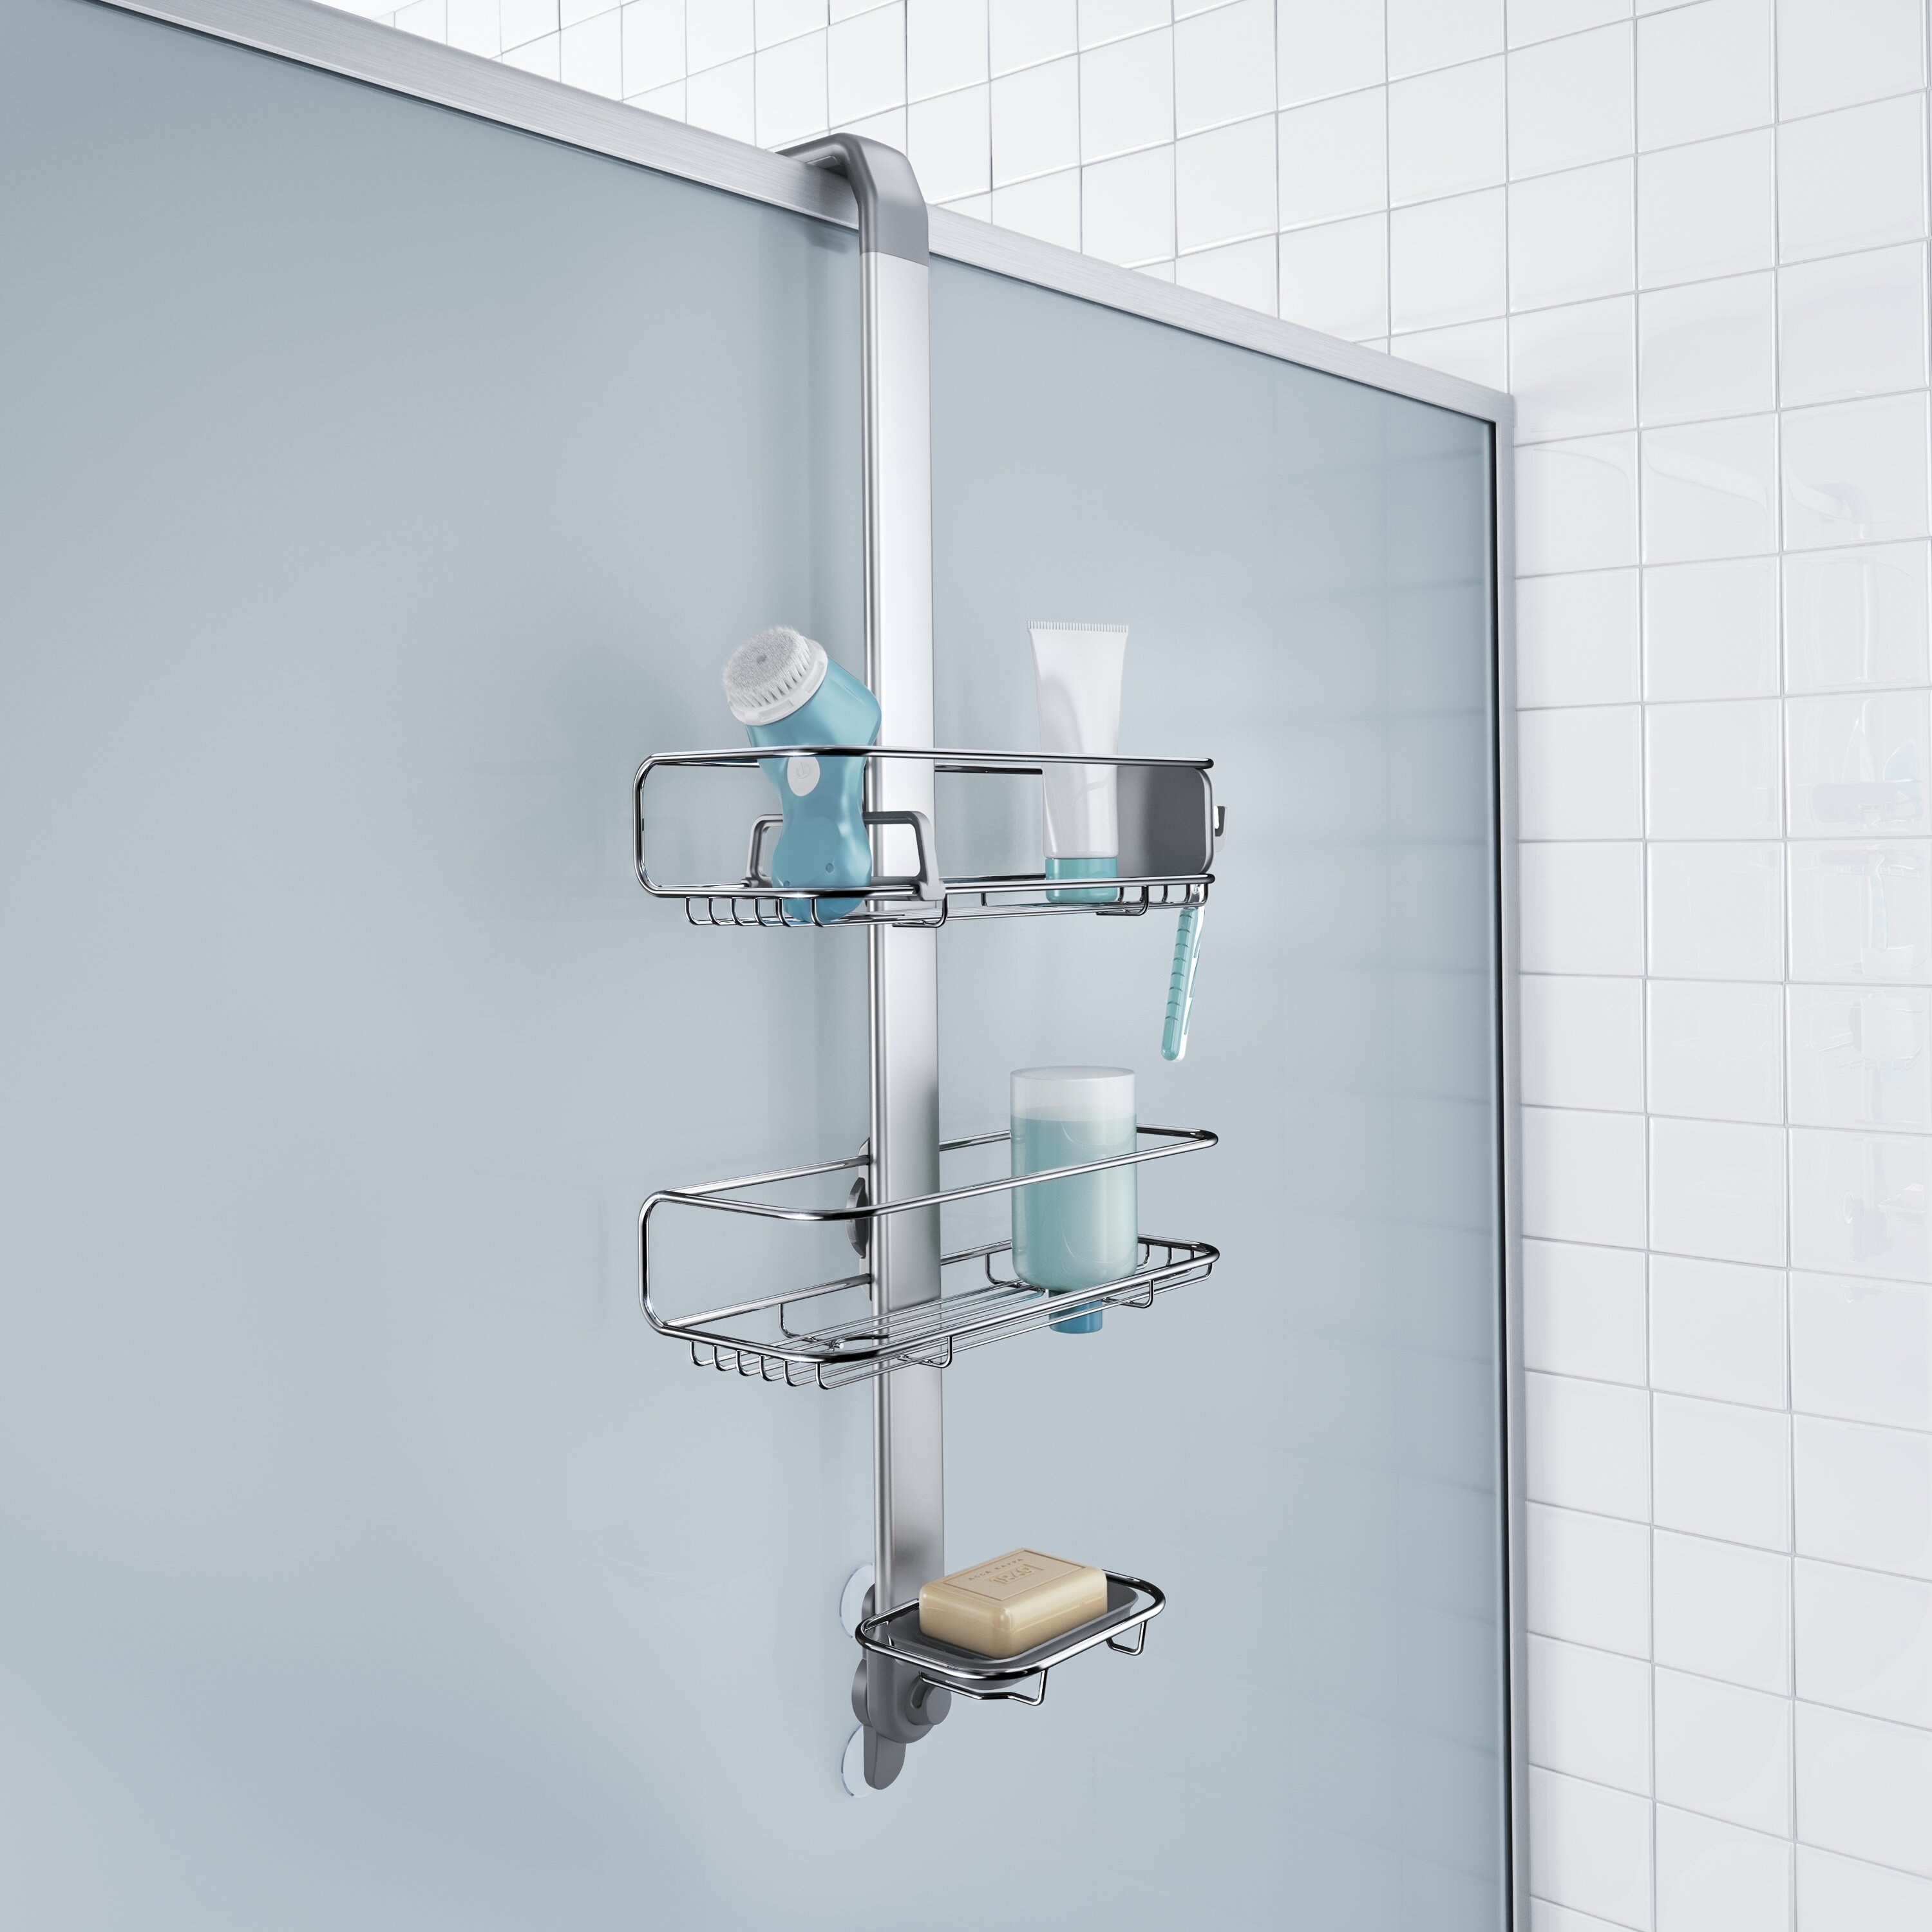 A metallic contraption that hangs over the side of the shower with shelving for soap and shampoo